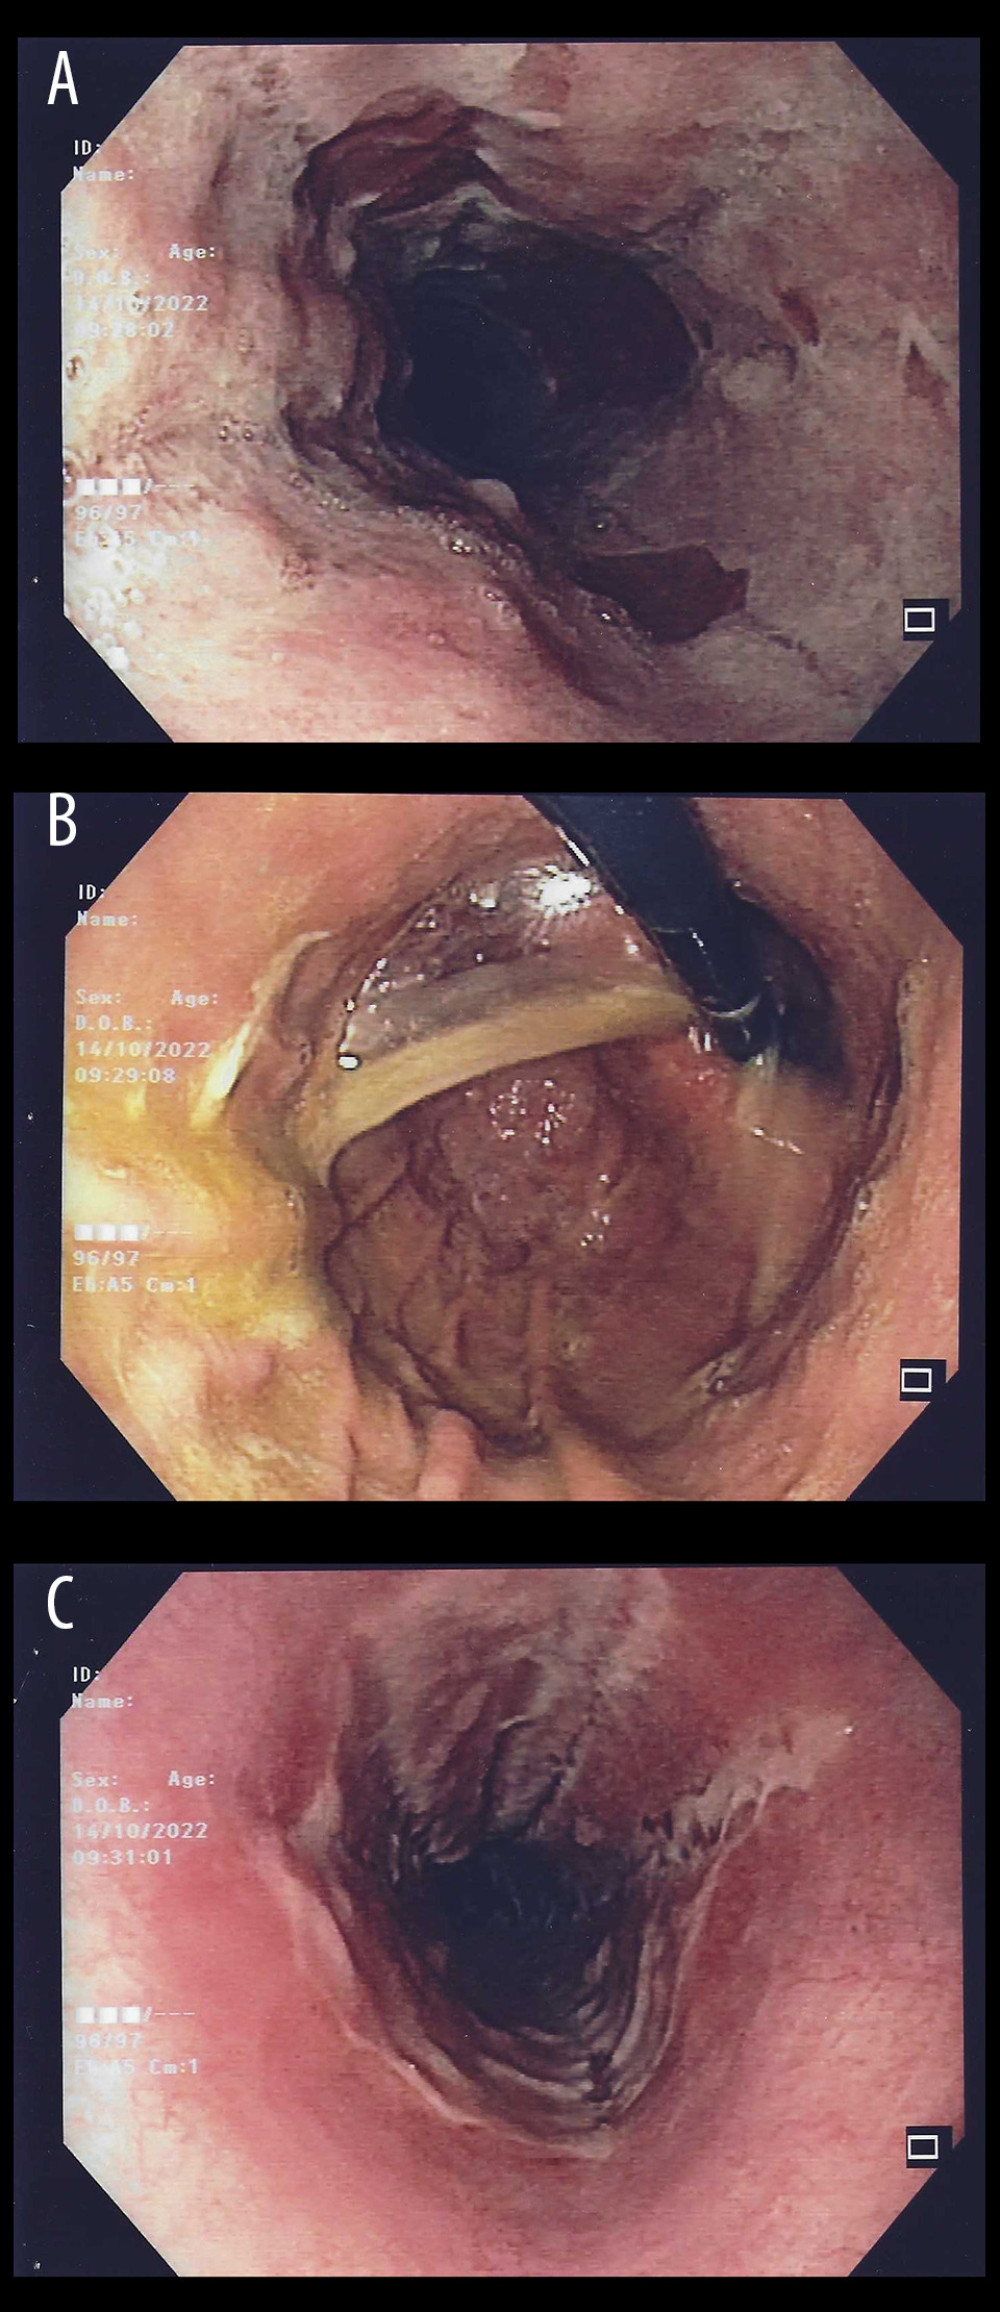 Second esophagogastroduodenoscopy with almost complete healing of necrotic esophageal mucosa: detail of the distal third of the esophagus (A); detail of the proximal gastric mucosa (B); detail of the middle third of esophageal mucosa (C).